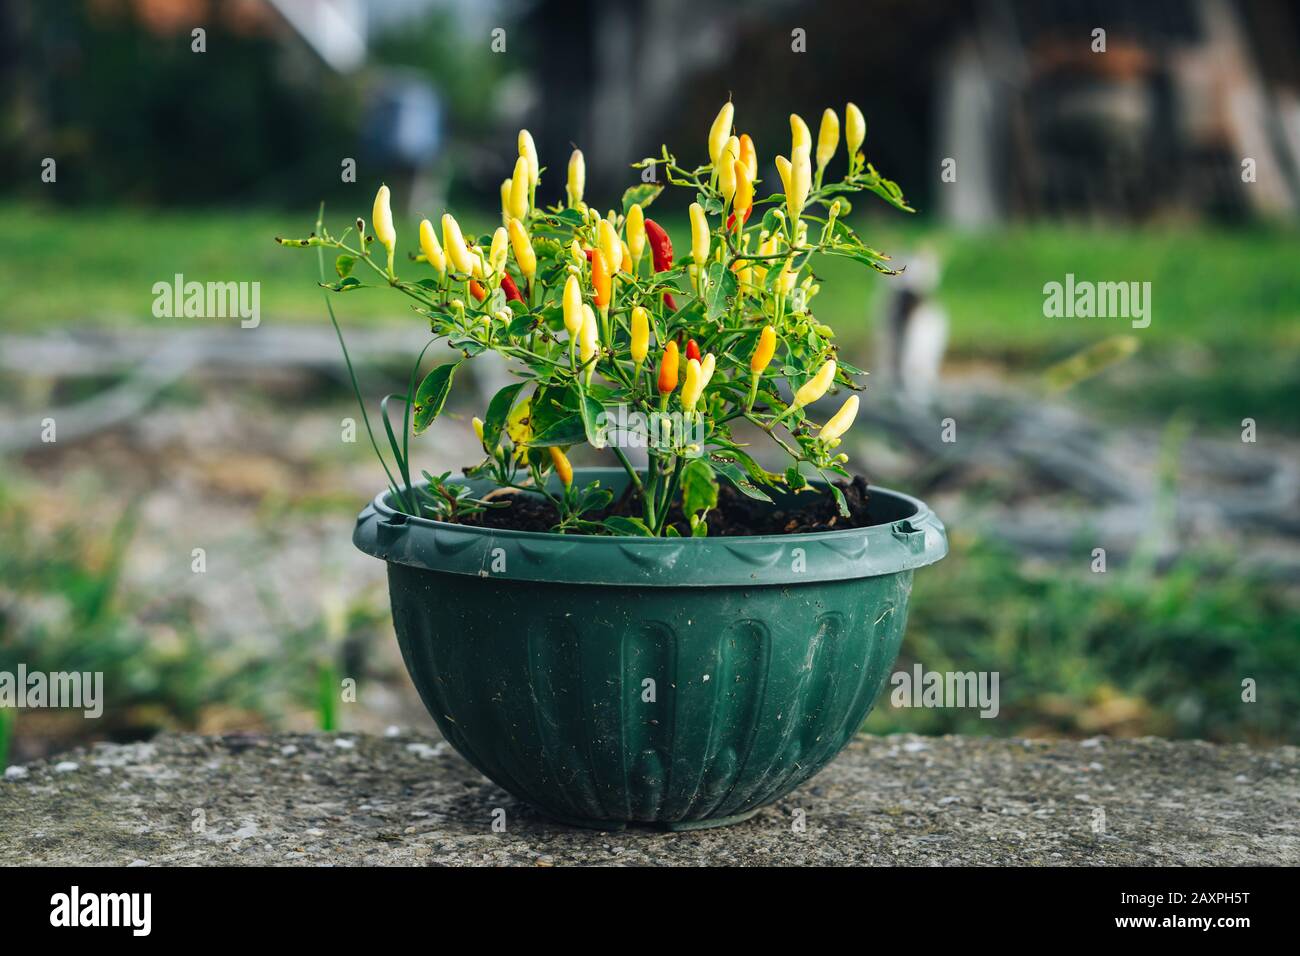 Small hot peppers in a plant pot Stock Photo